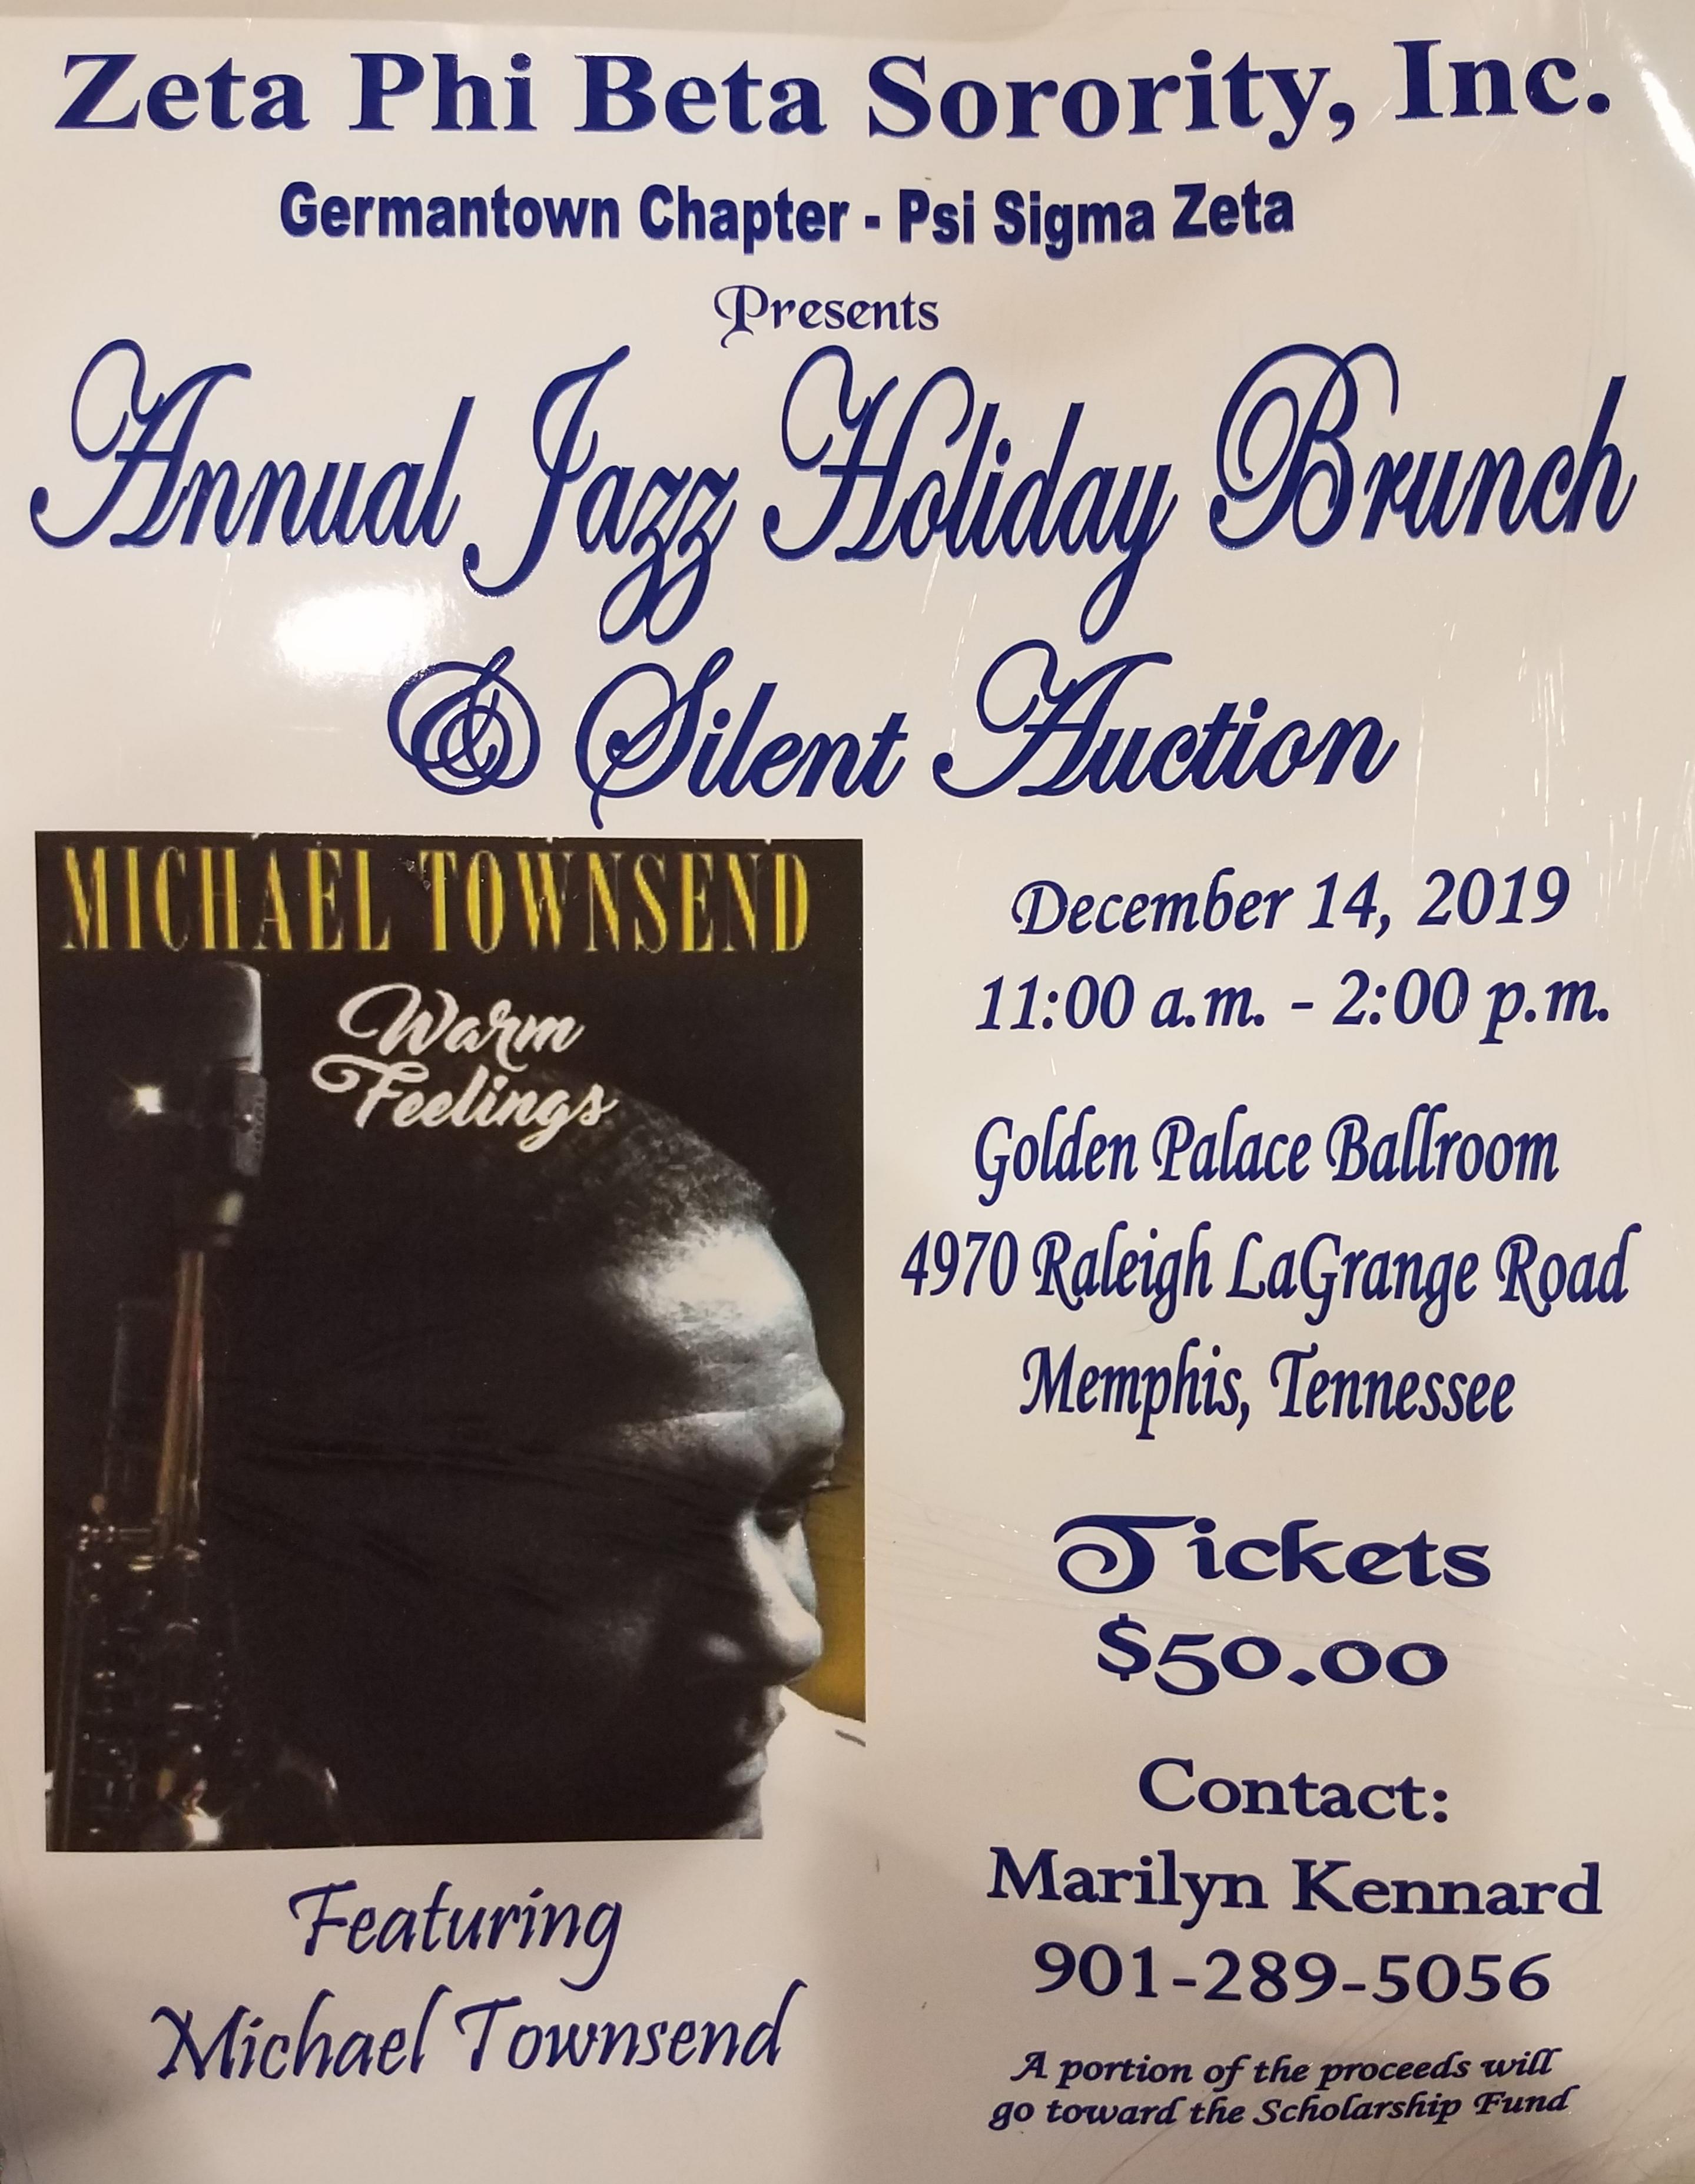 Annual Jazz Holiday Brunch & Silent Auction